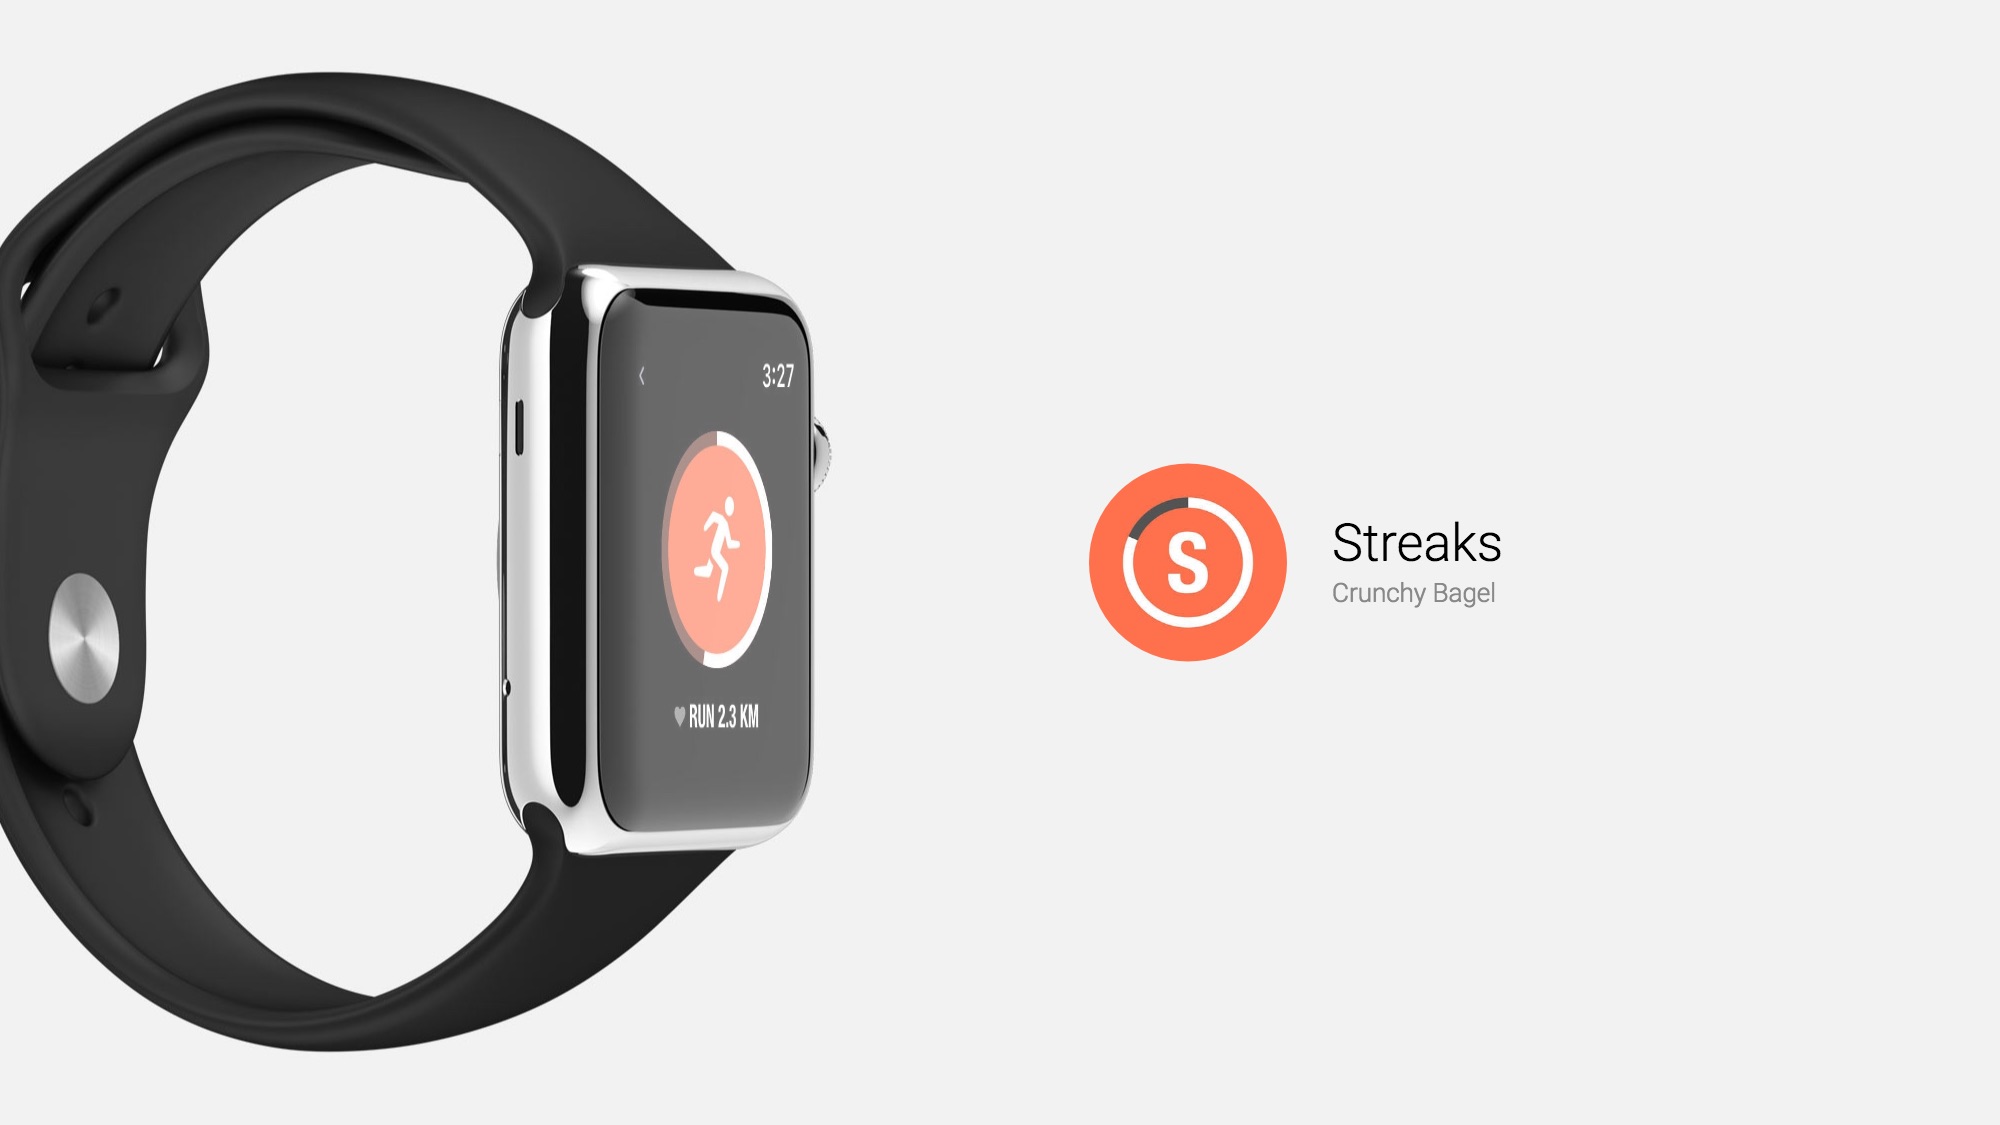 Living Better Is Fun With Streaks on Your Apple Watch